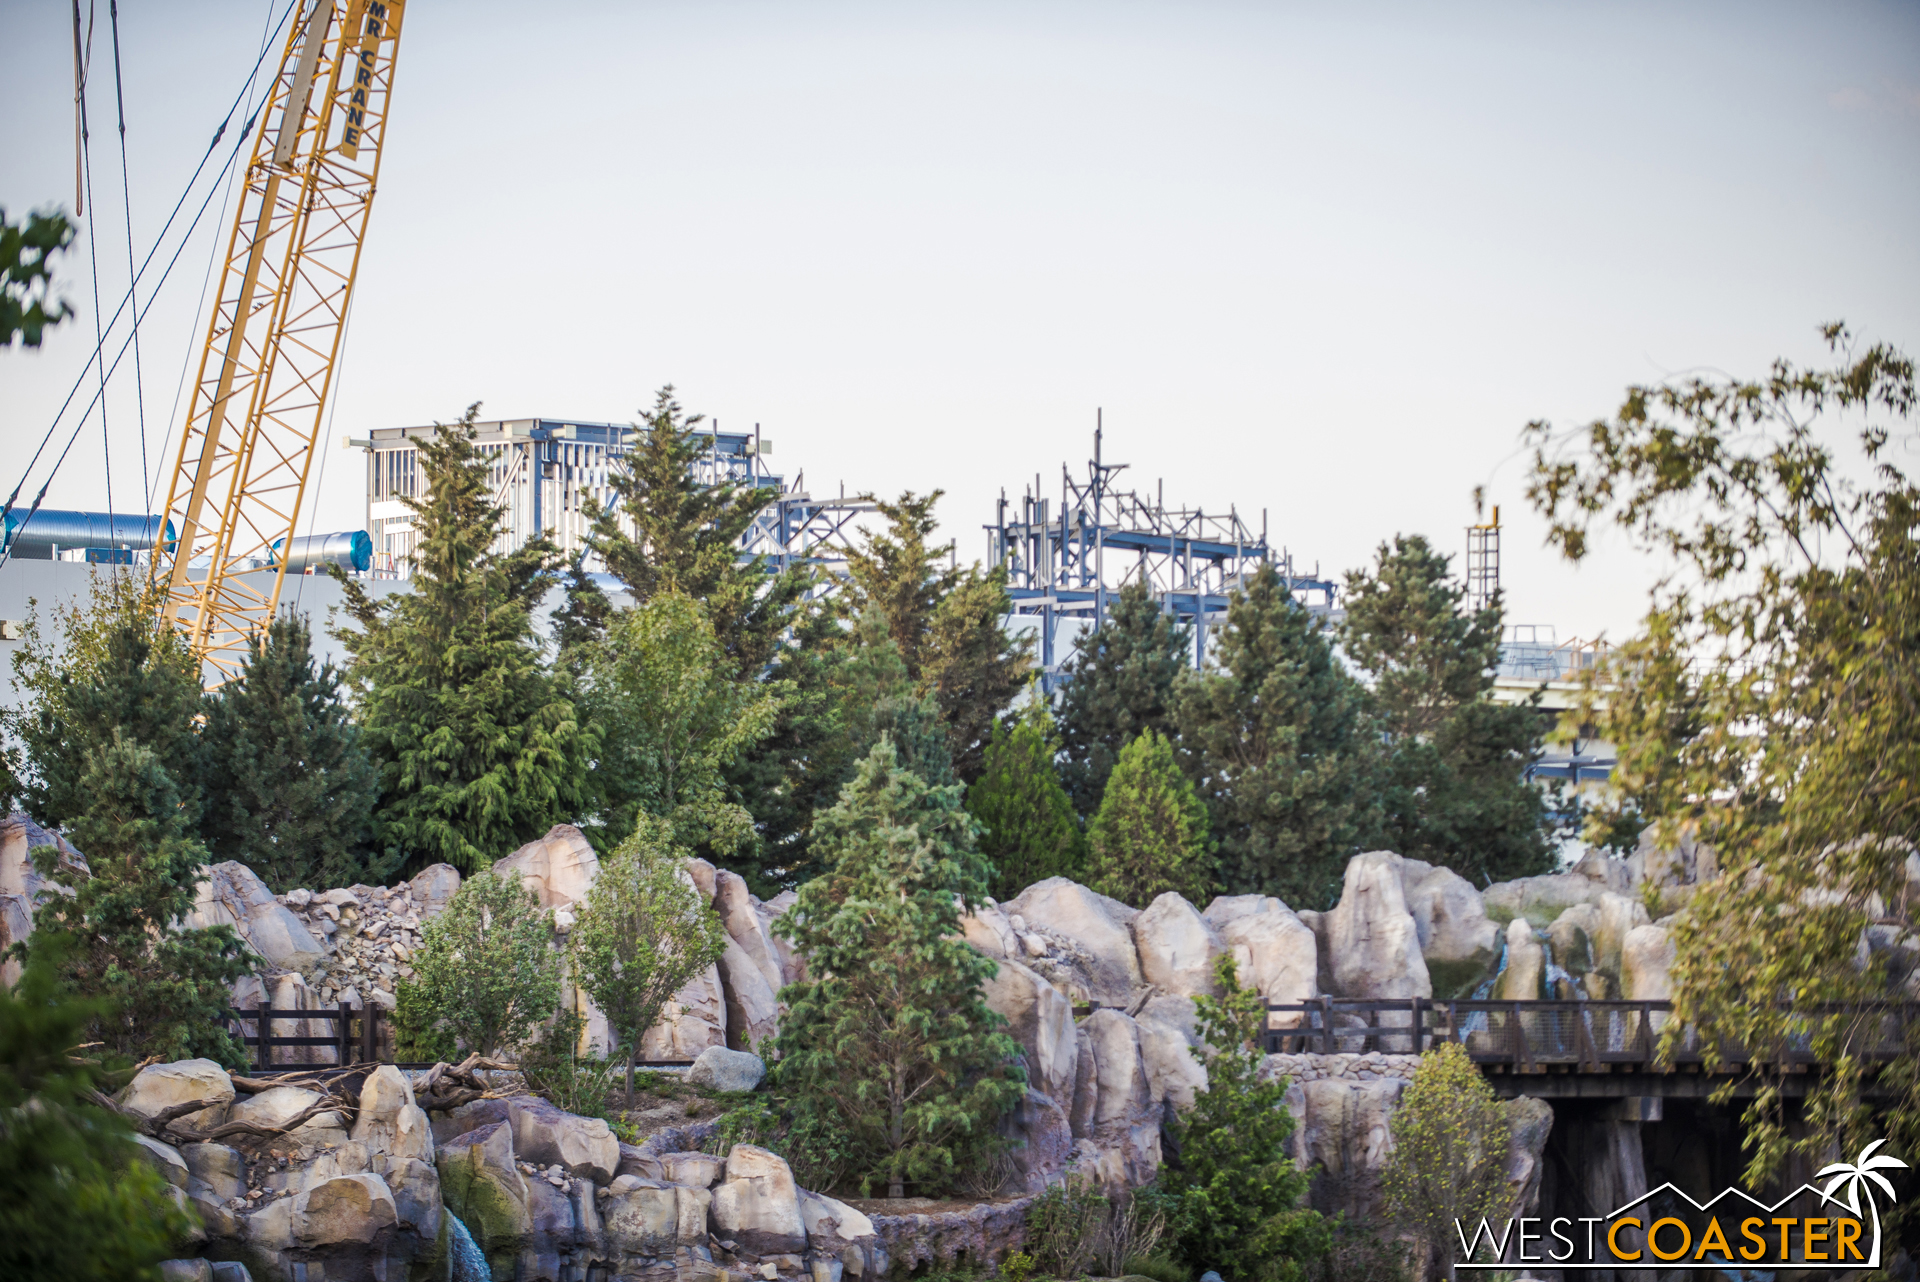  Regardless, you can start to imagine how Star Wars: Galaxy's Edge will fit in here when it's complete. &nbsp;The aesthetic should be pretty natural, and it's certainly exciting to anticipate! 